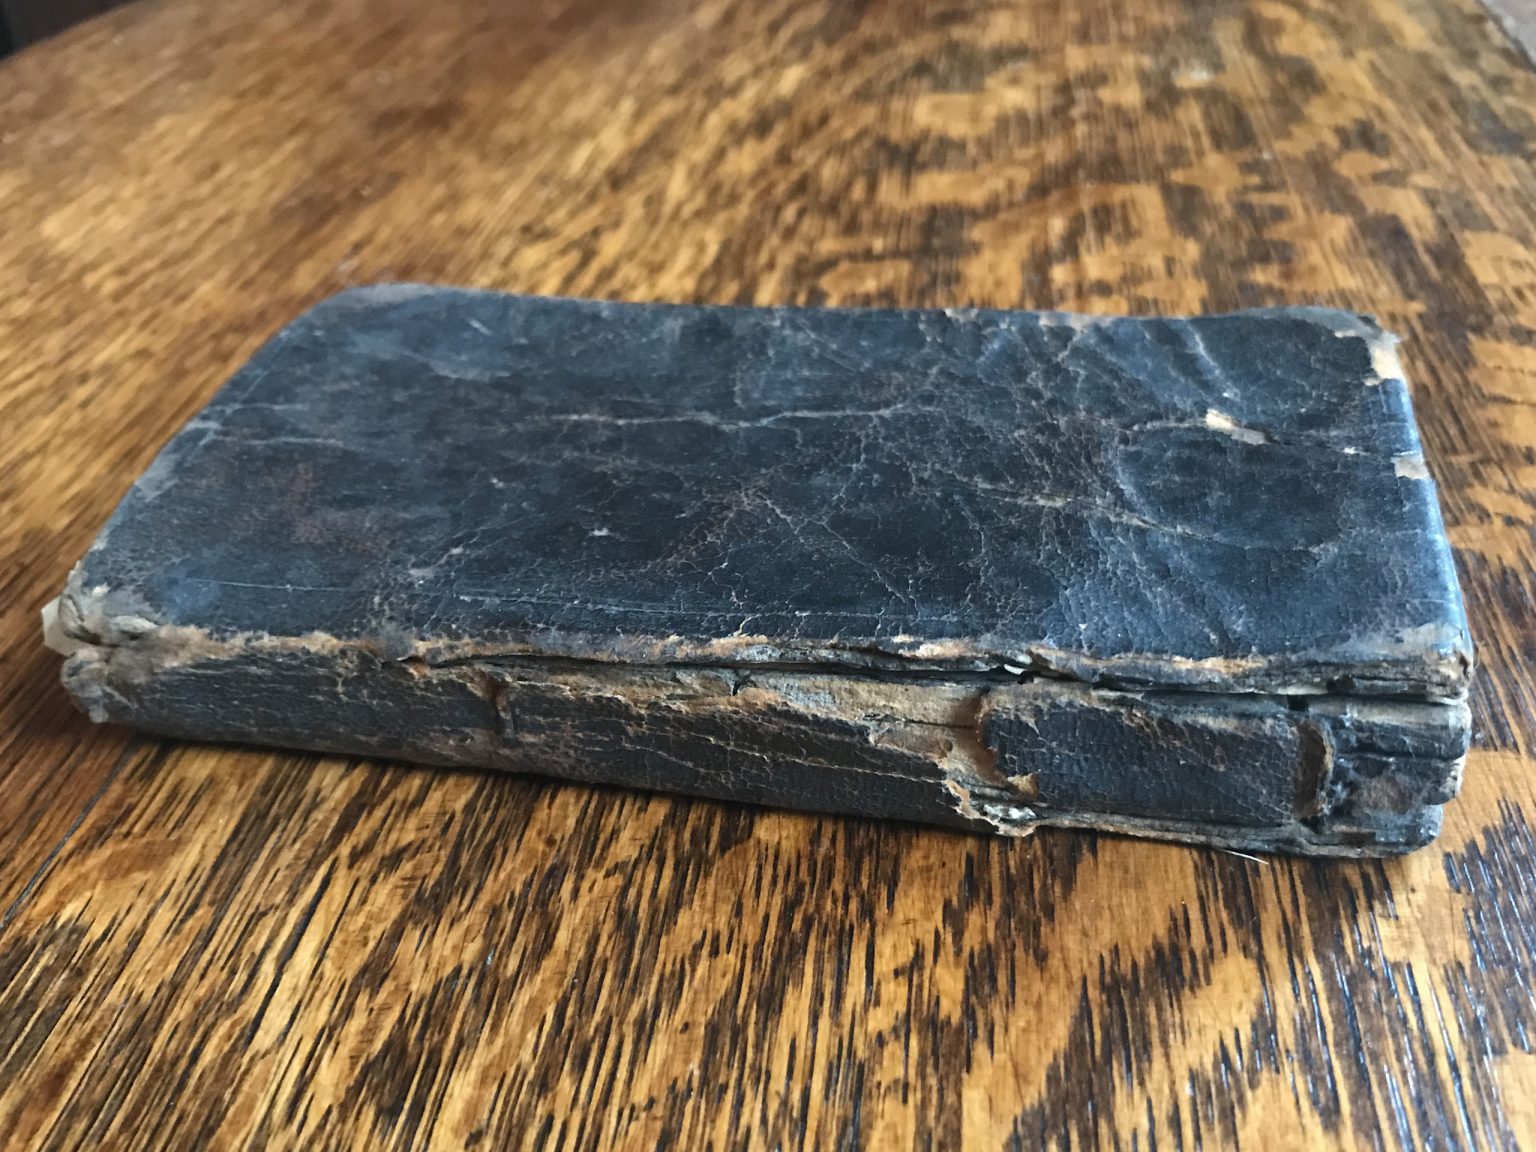 A rather battered copy of The English Empire in America